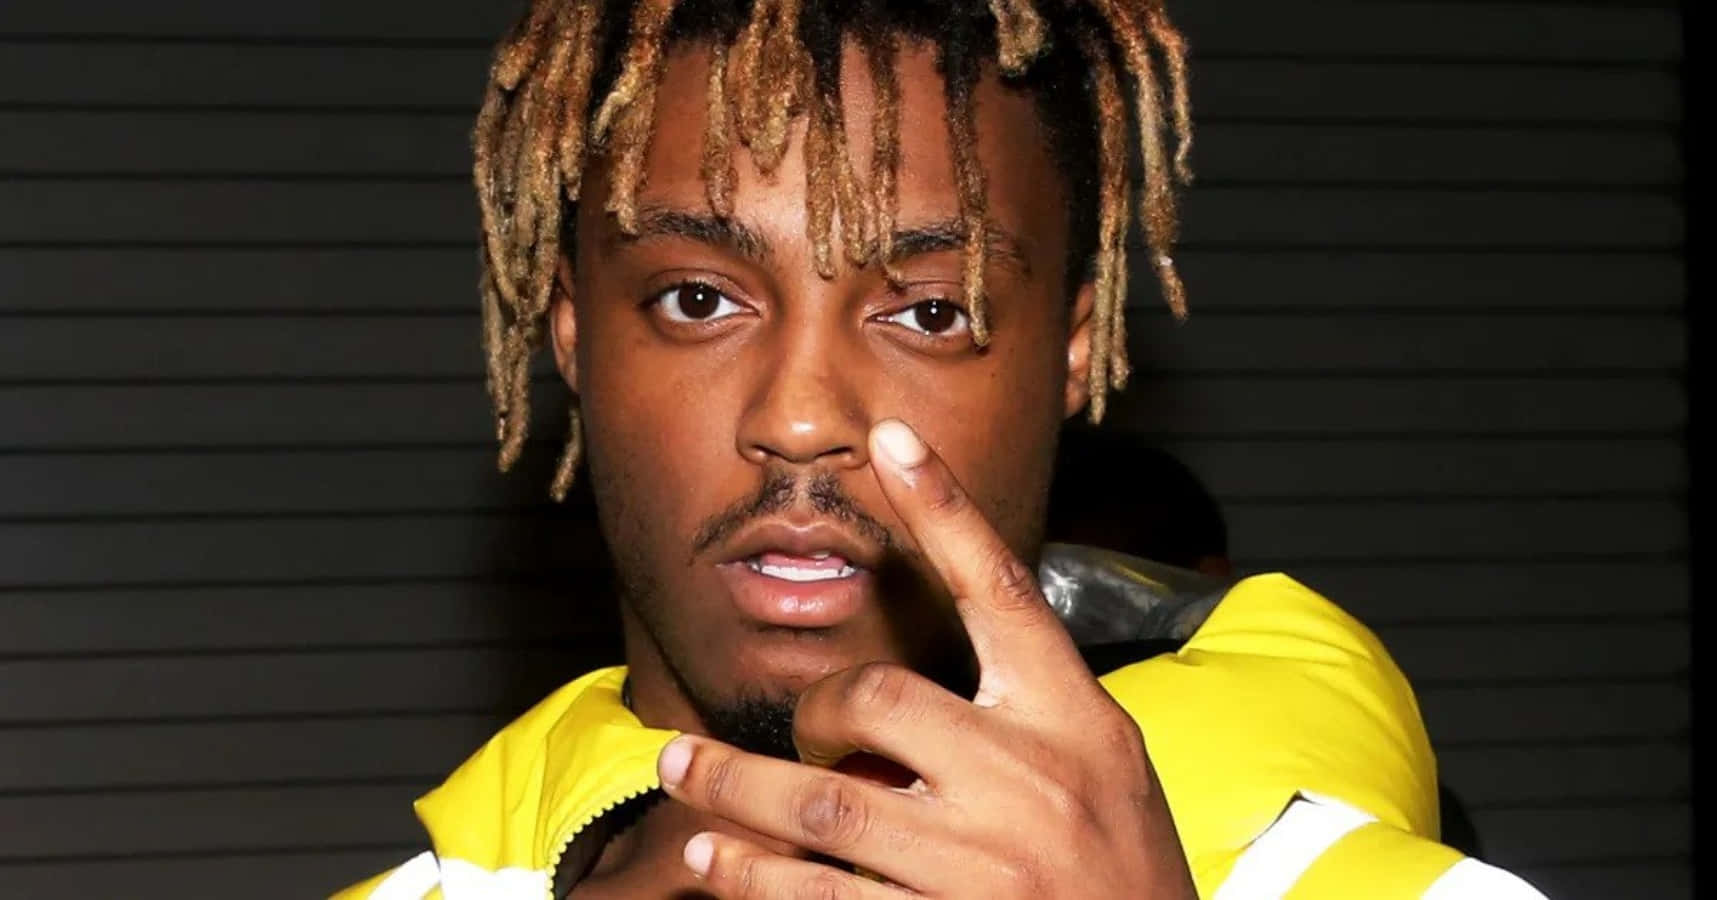 Juice Wrld Looking Swagged Out in His 'Legends Never Die' Merch